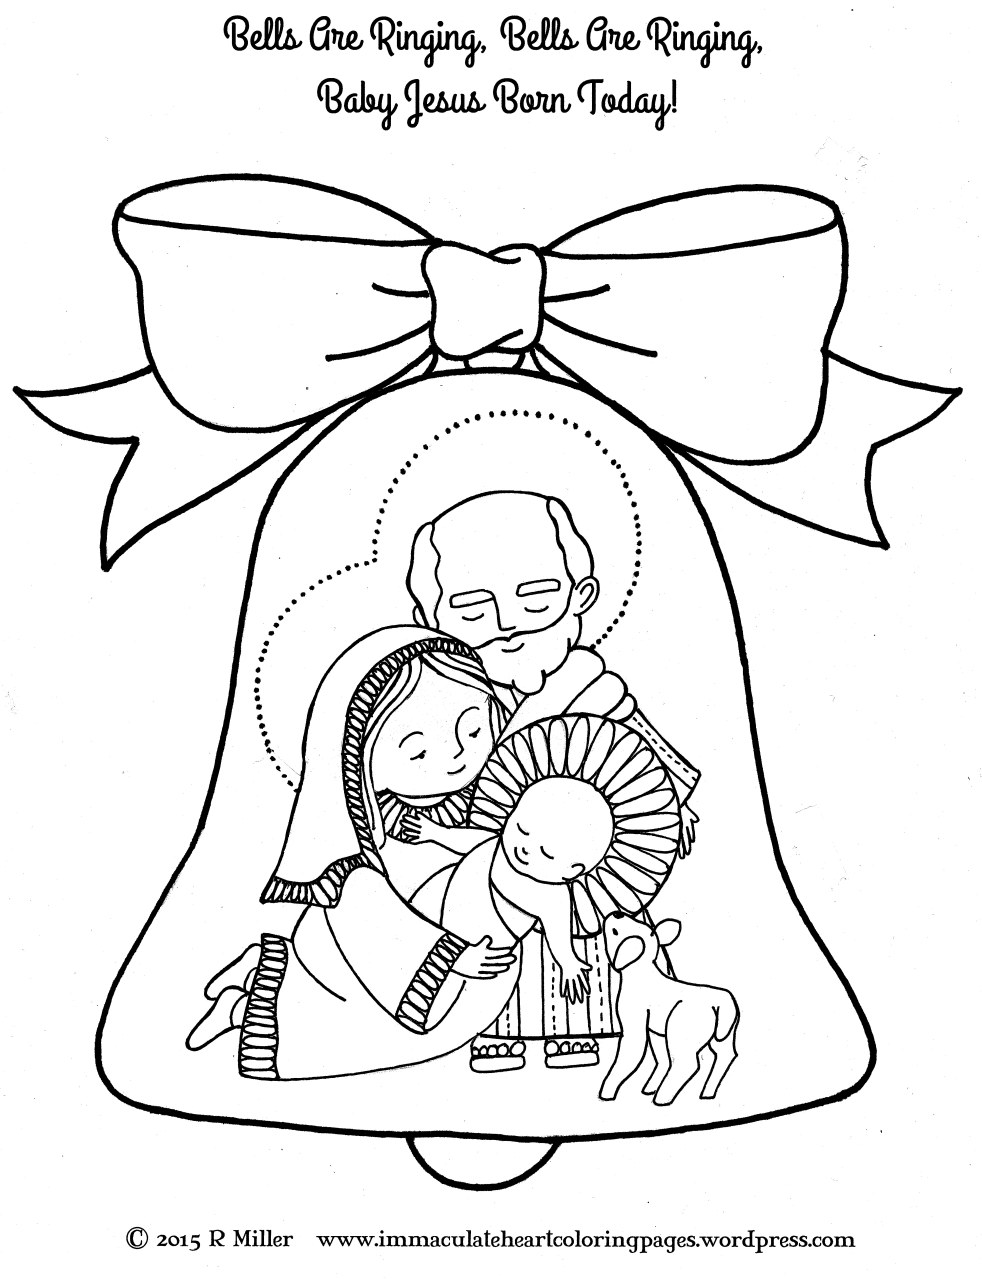 Immaculate Heart Coloring Pages - Catholic Christian Pages ...